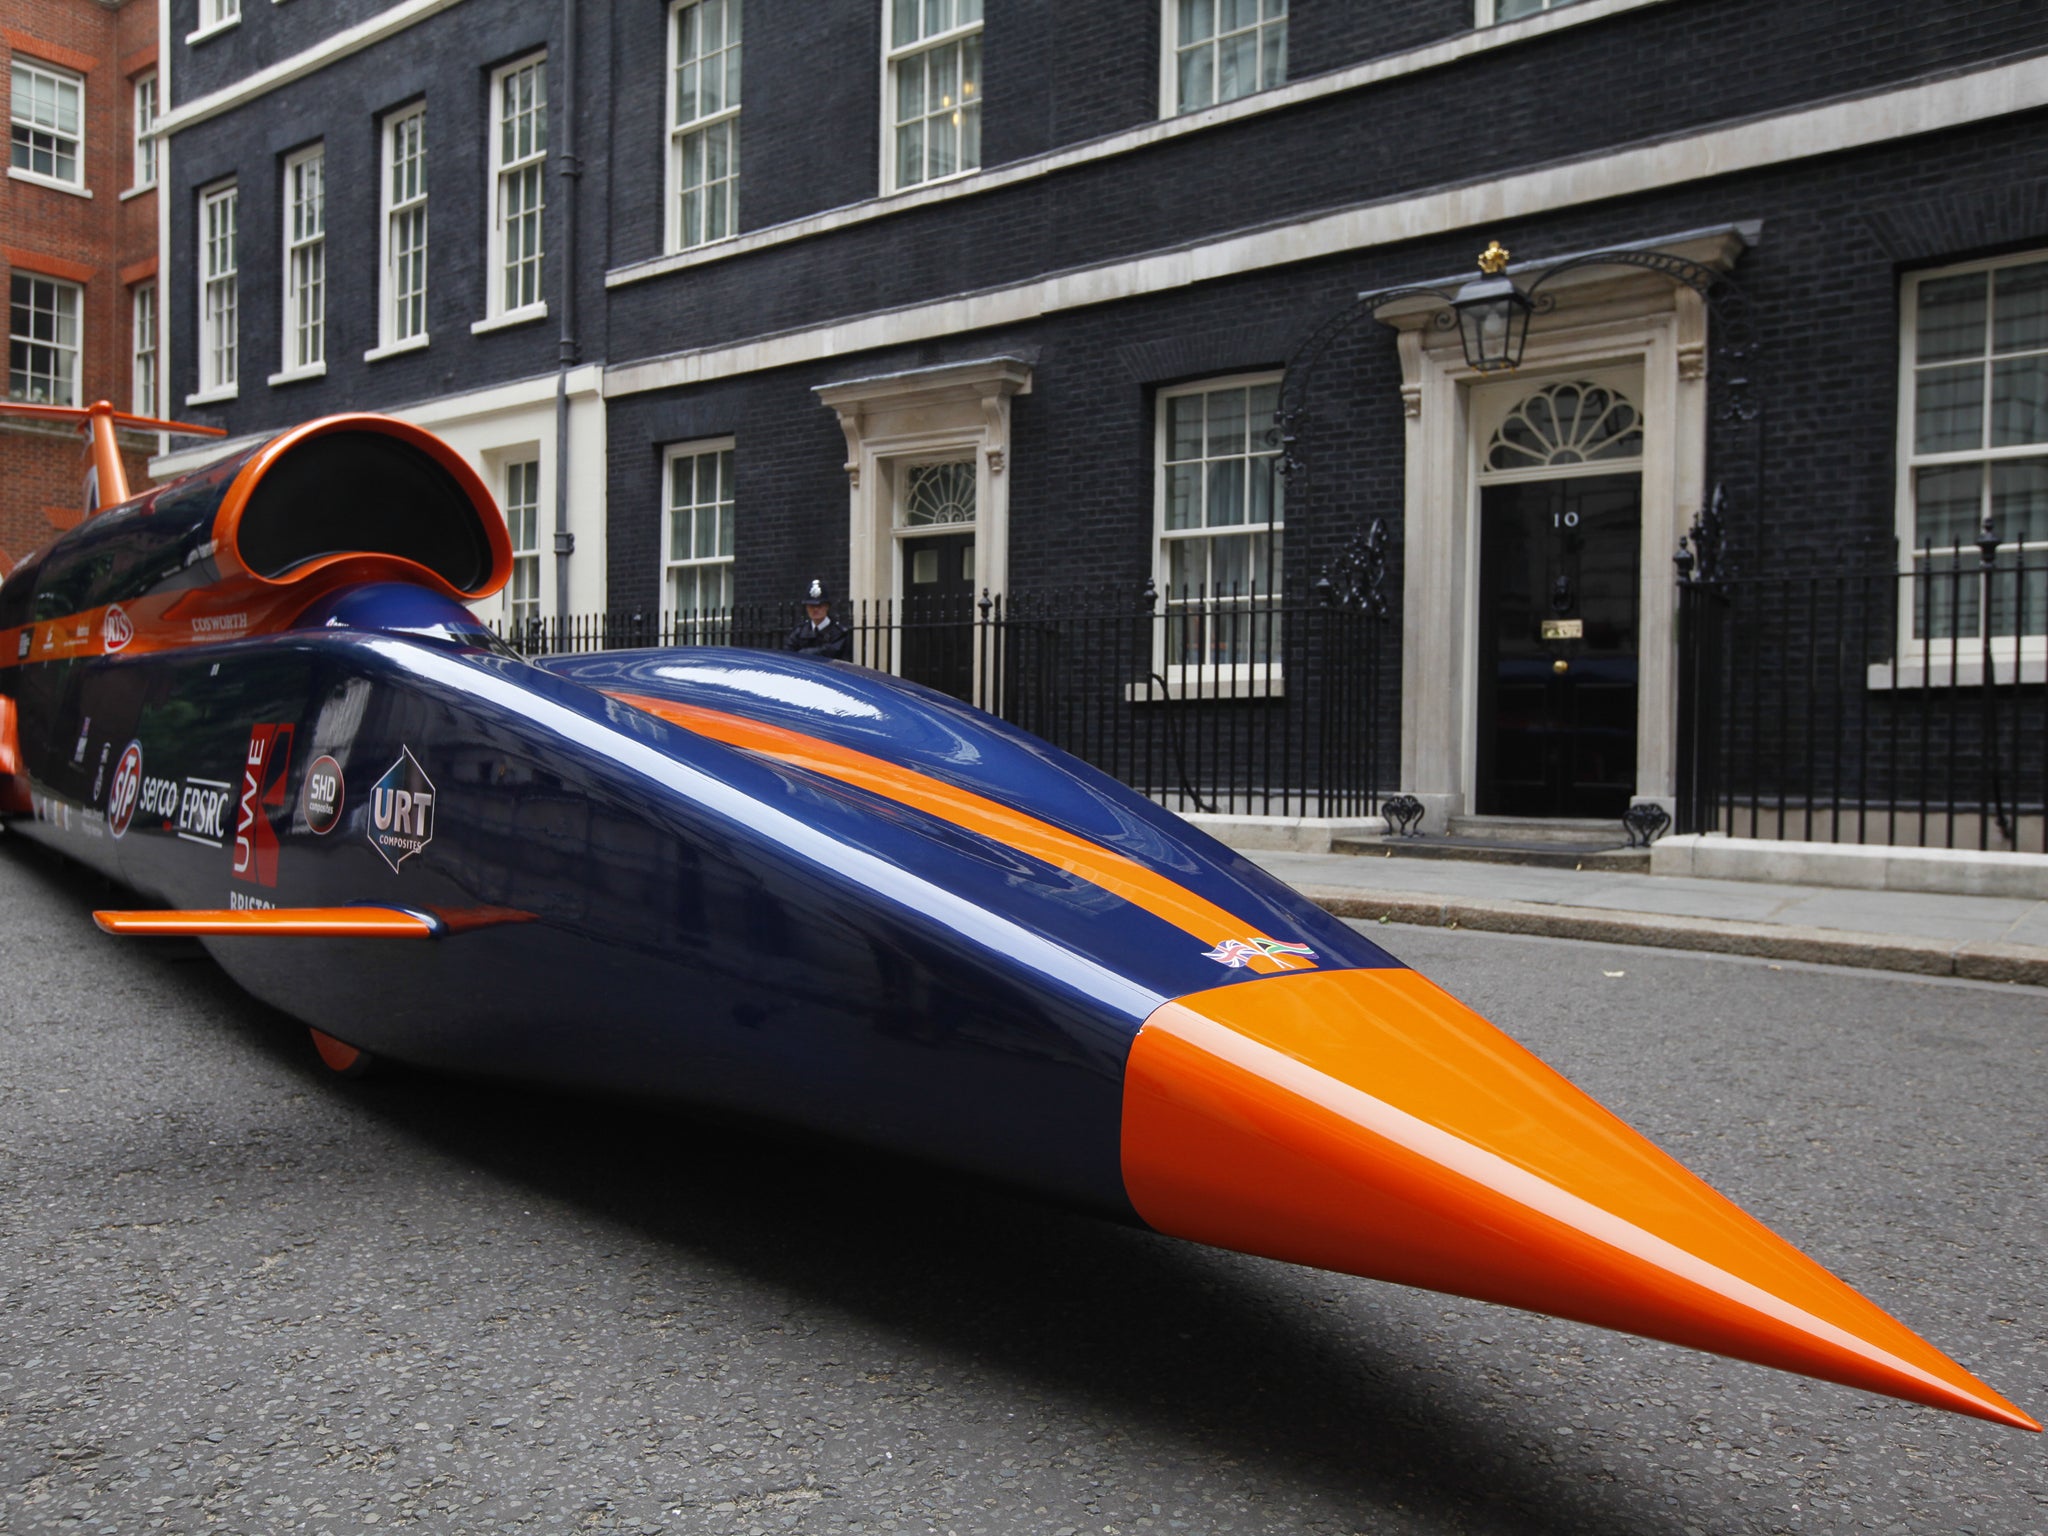 The car is displayed at Downing Street, when the team visited David Cameron to demonstrate the project